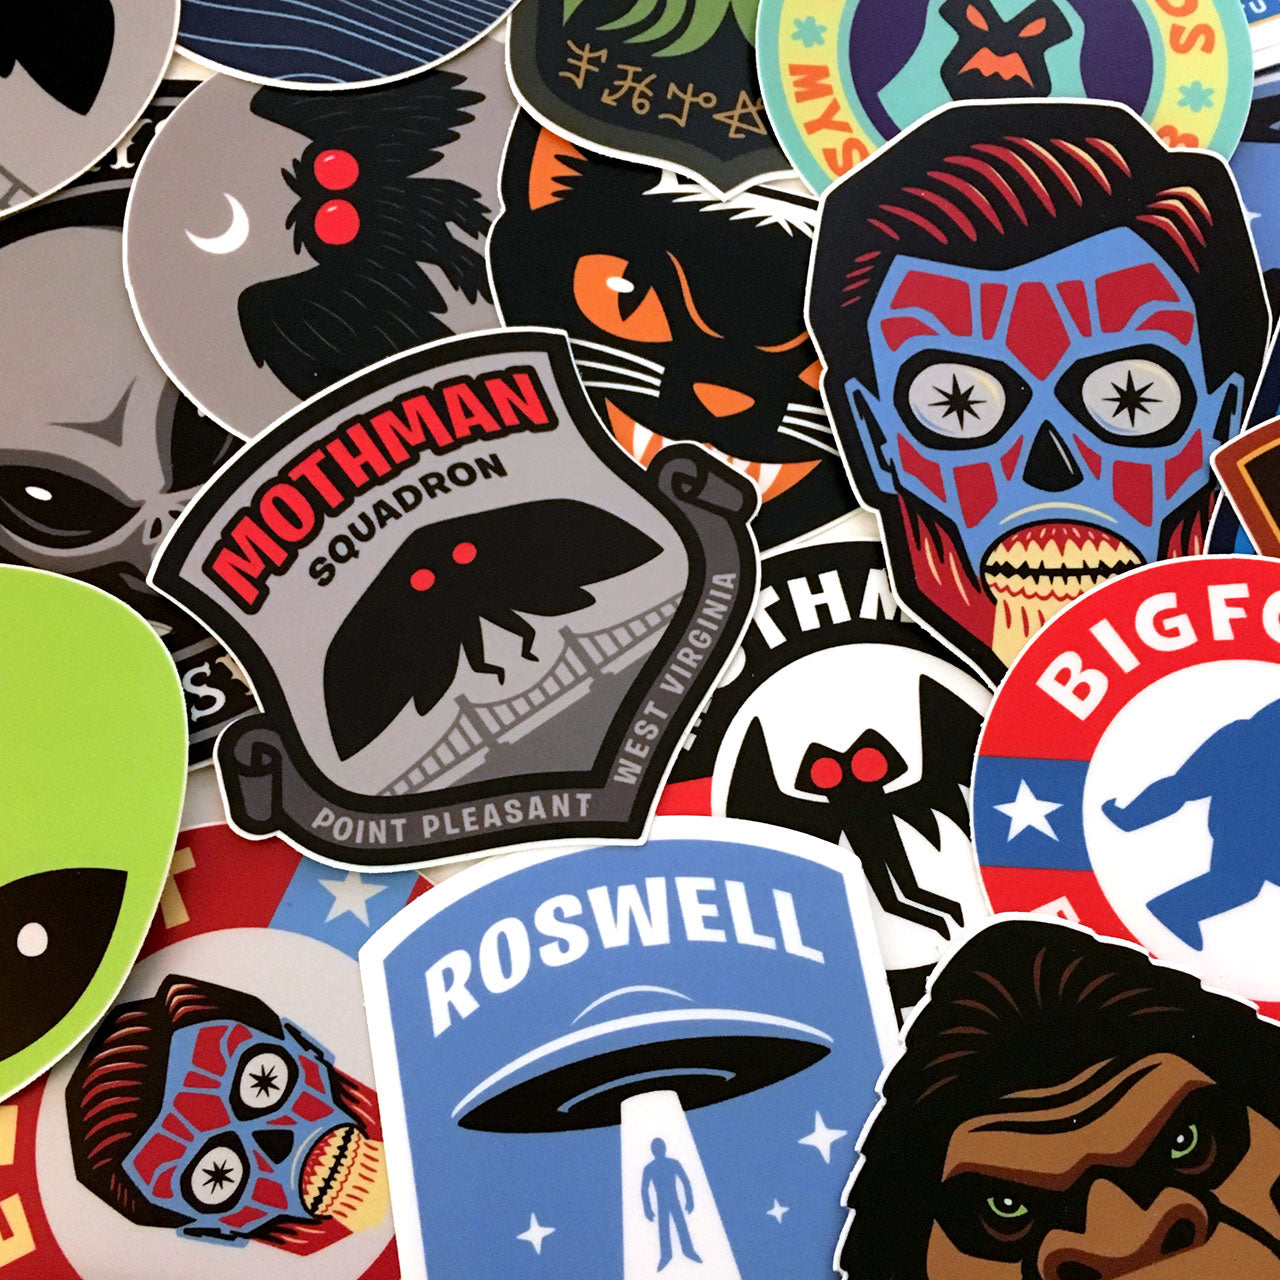 Cryptozoology, paranormal & supernatural vinyl stickers by Monsterologist